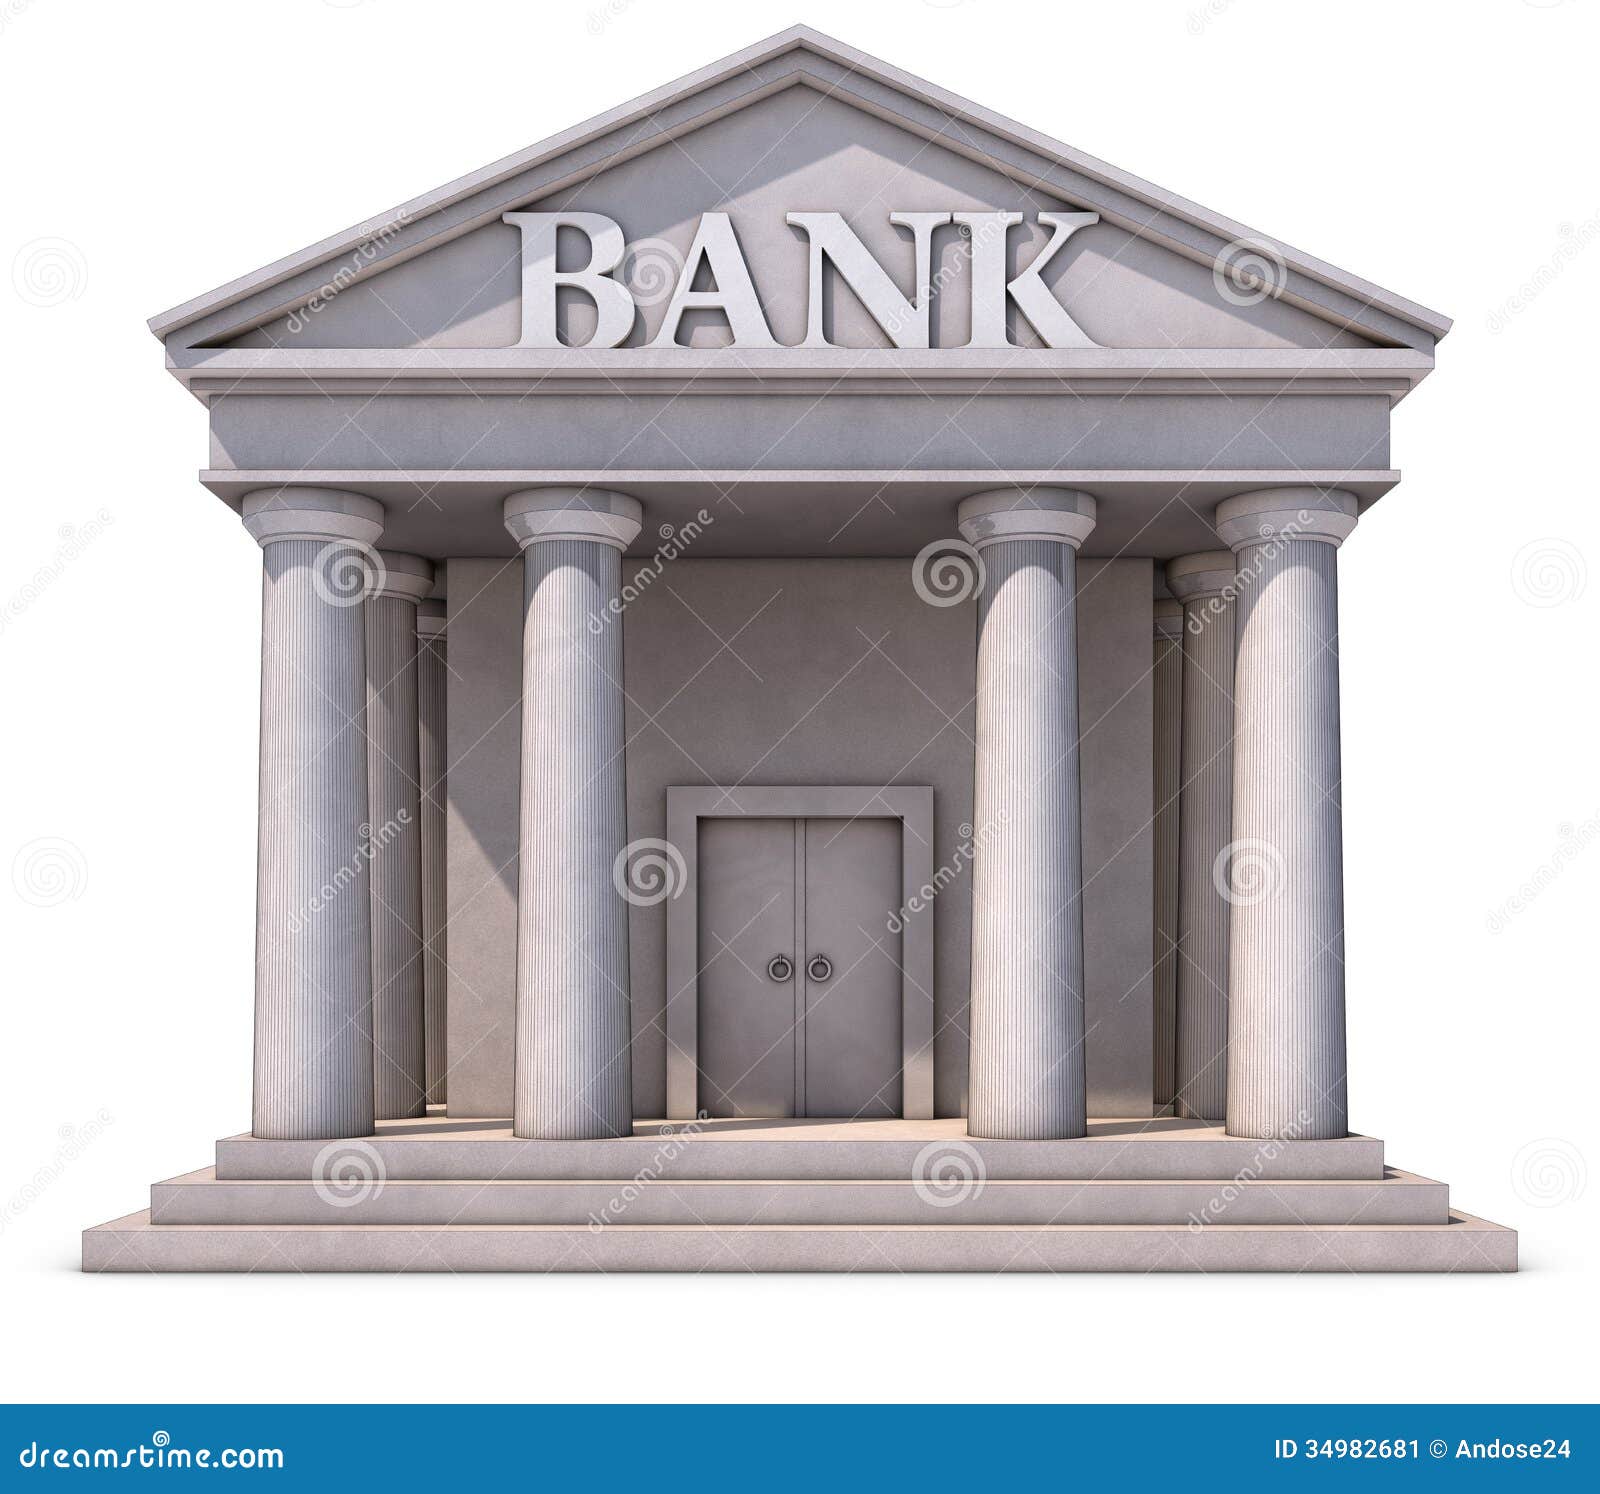 bank clipart images - photo #27